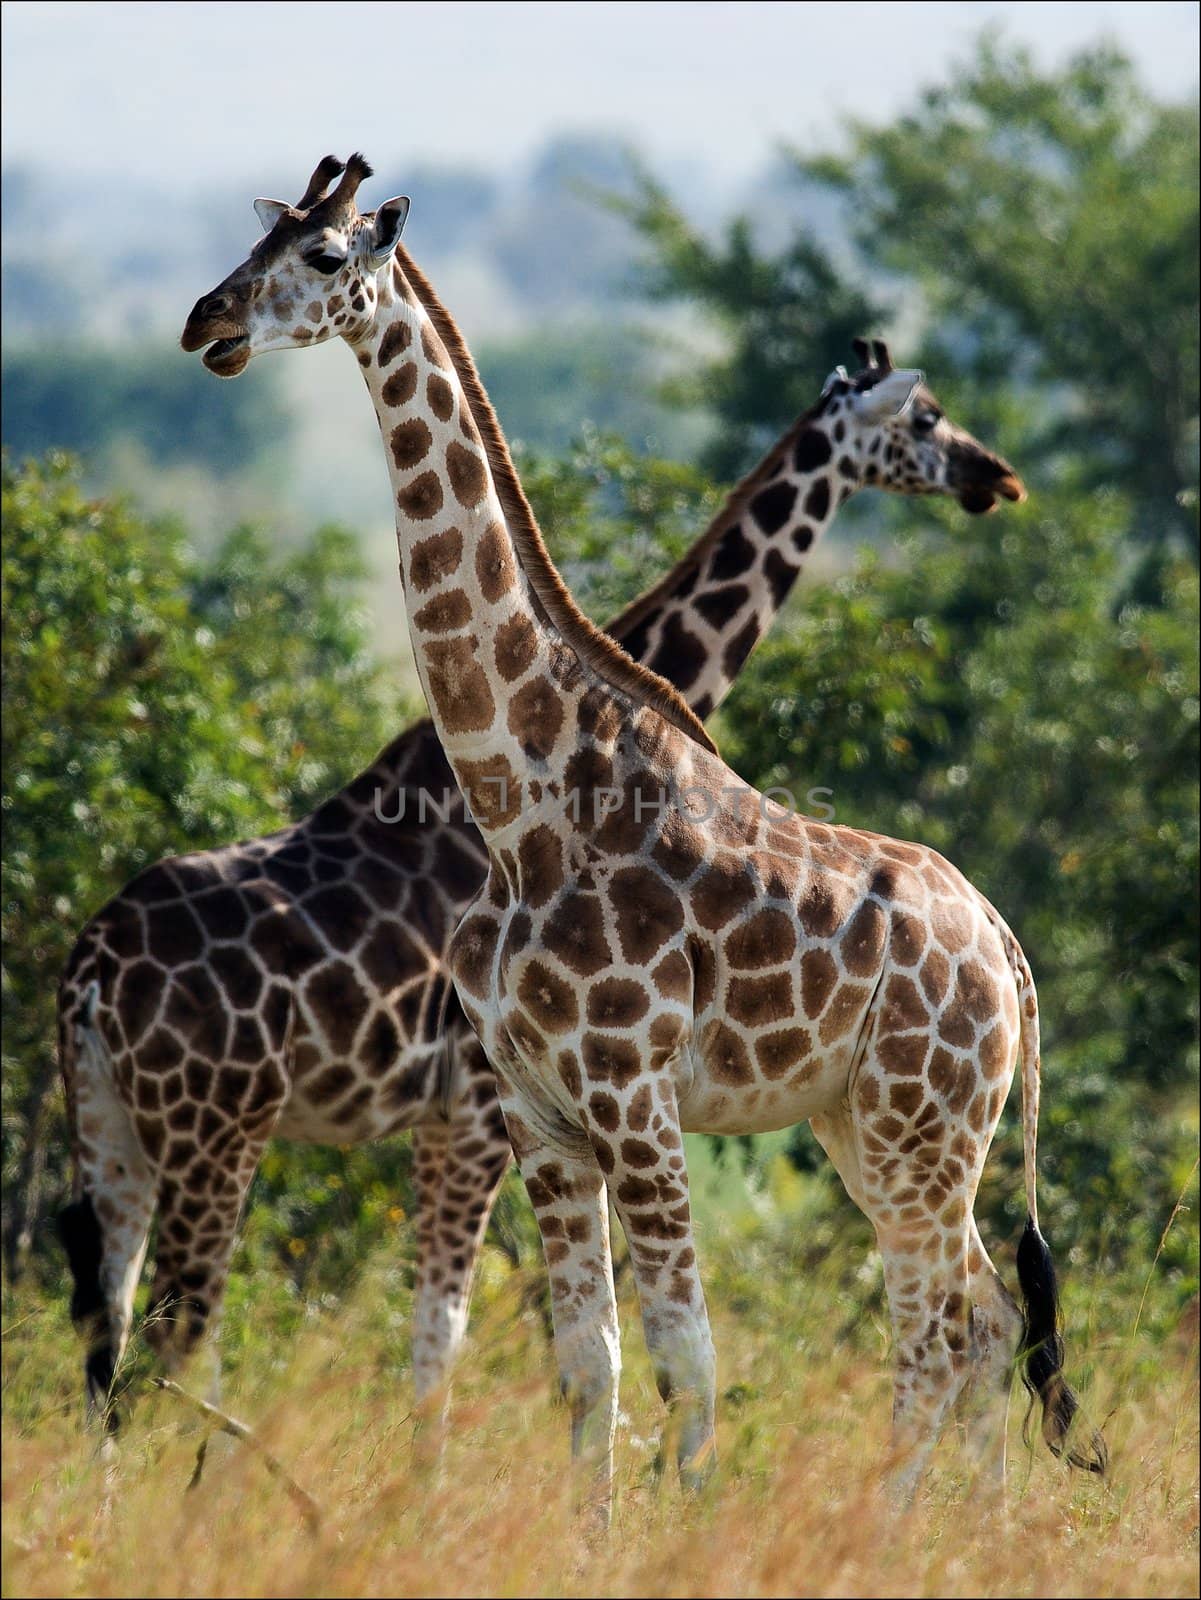 Two giraffes. Under a shining sun two giraffes stand at a tree with the crossed long necks.